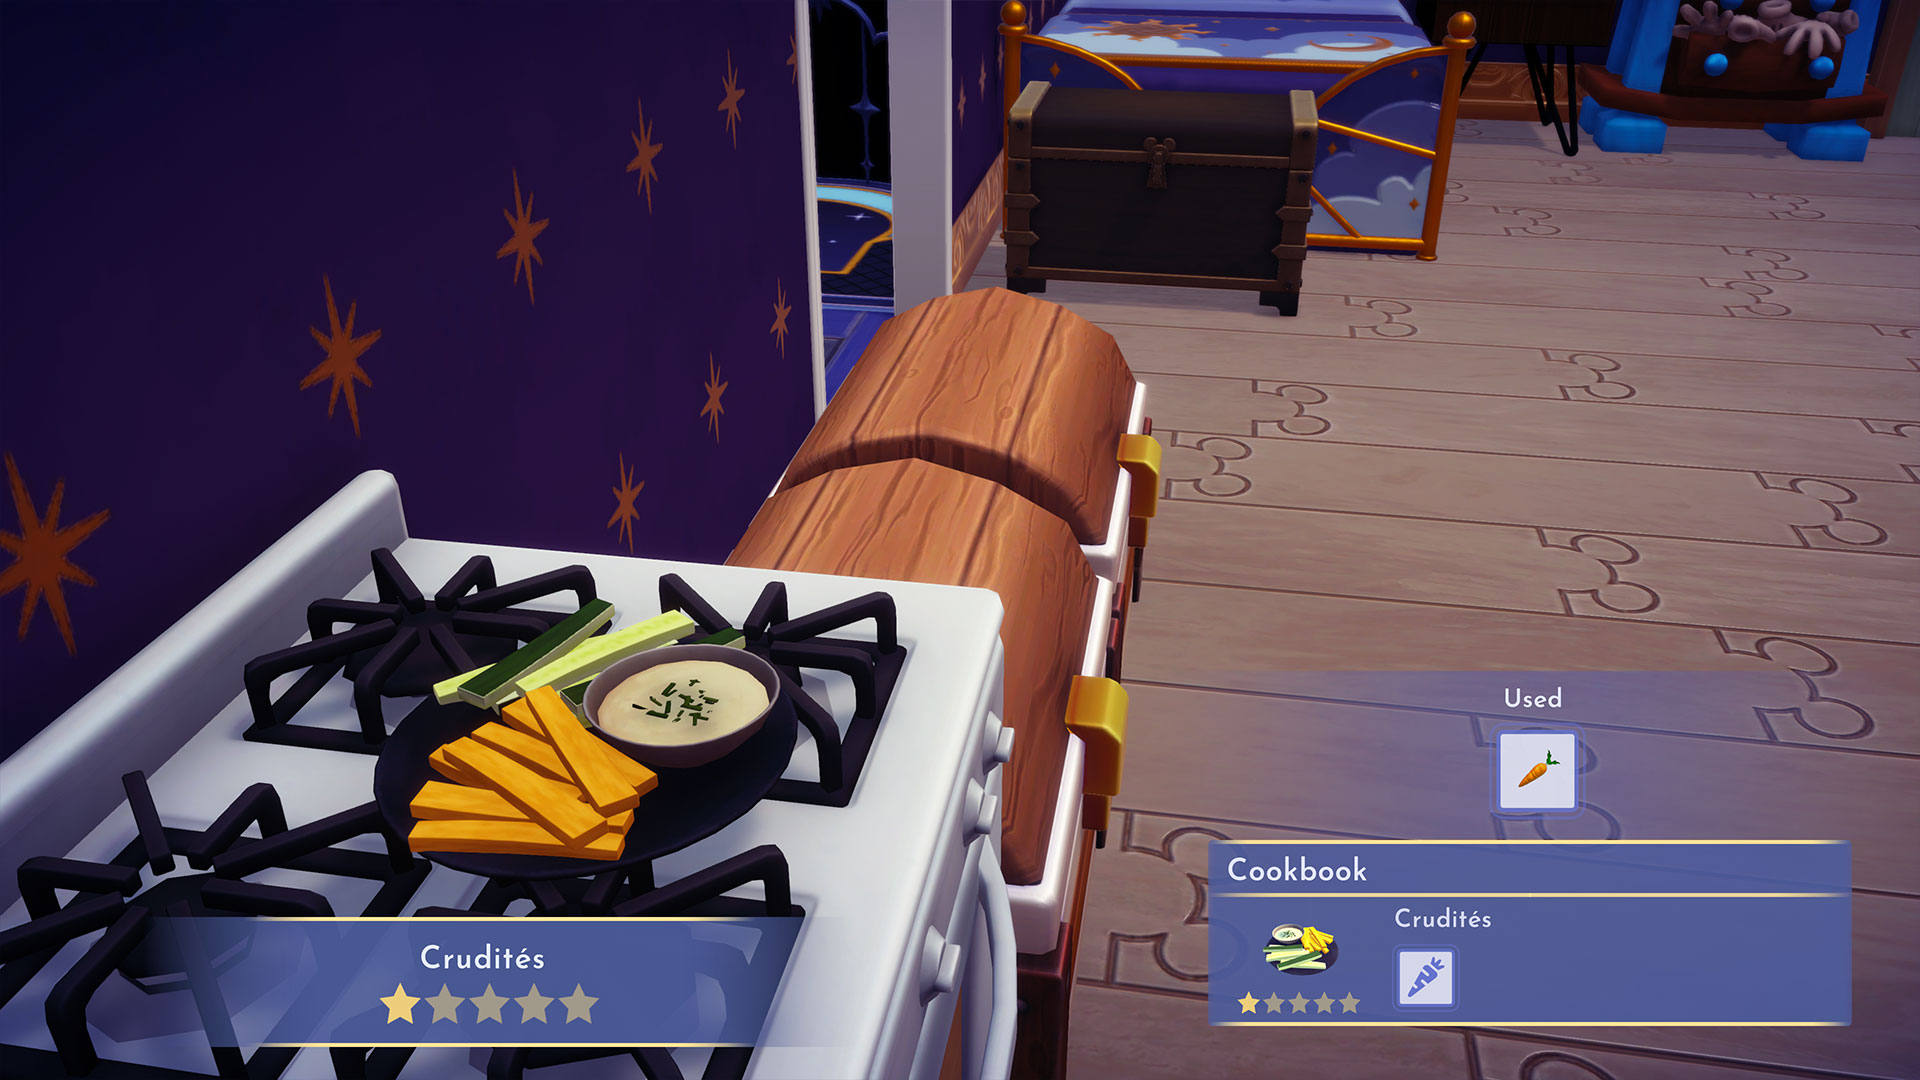 How to make Crudites in Disney Dreamlight Valley